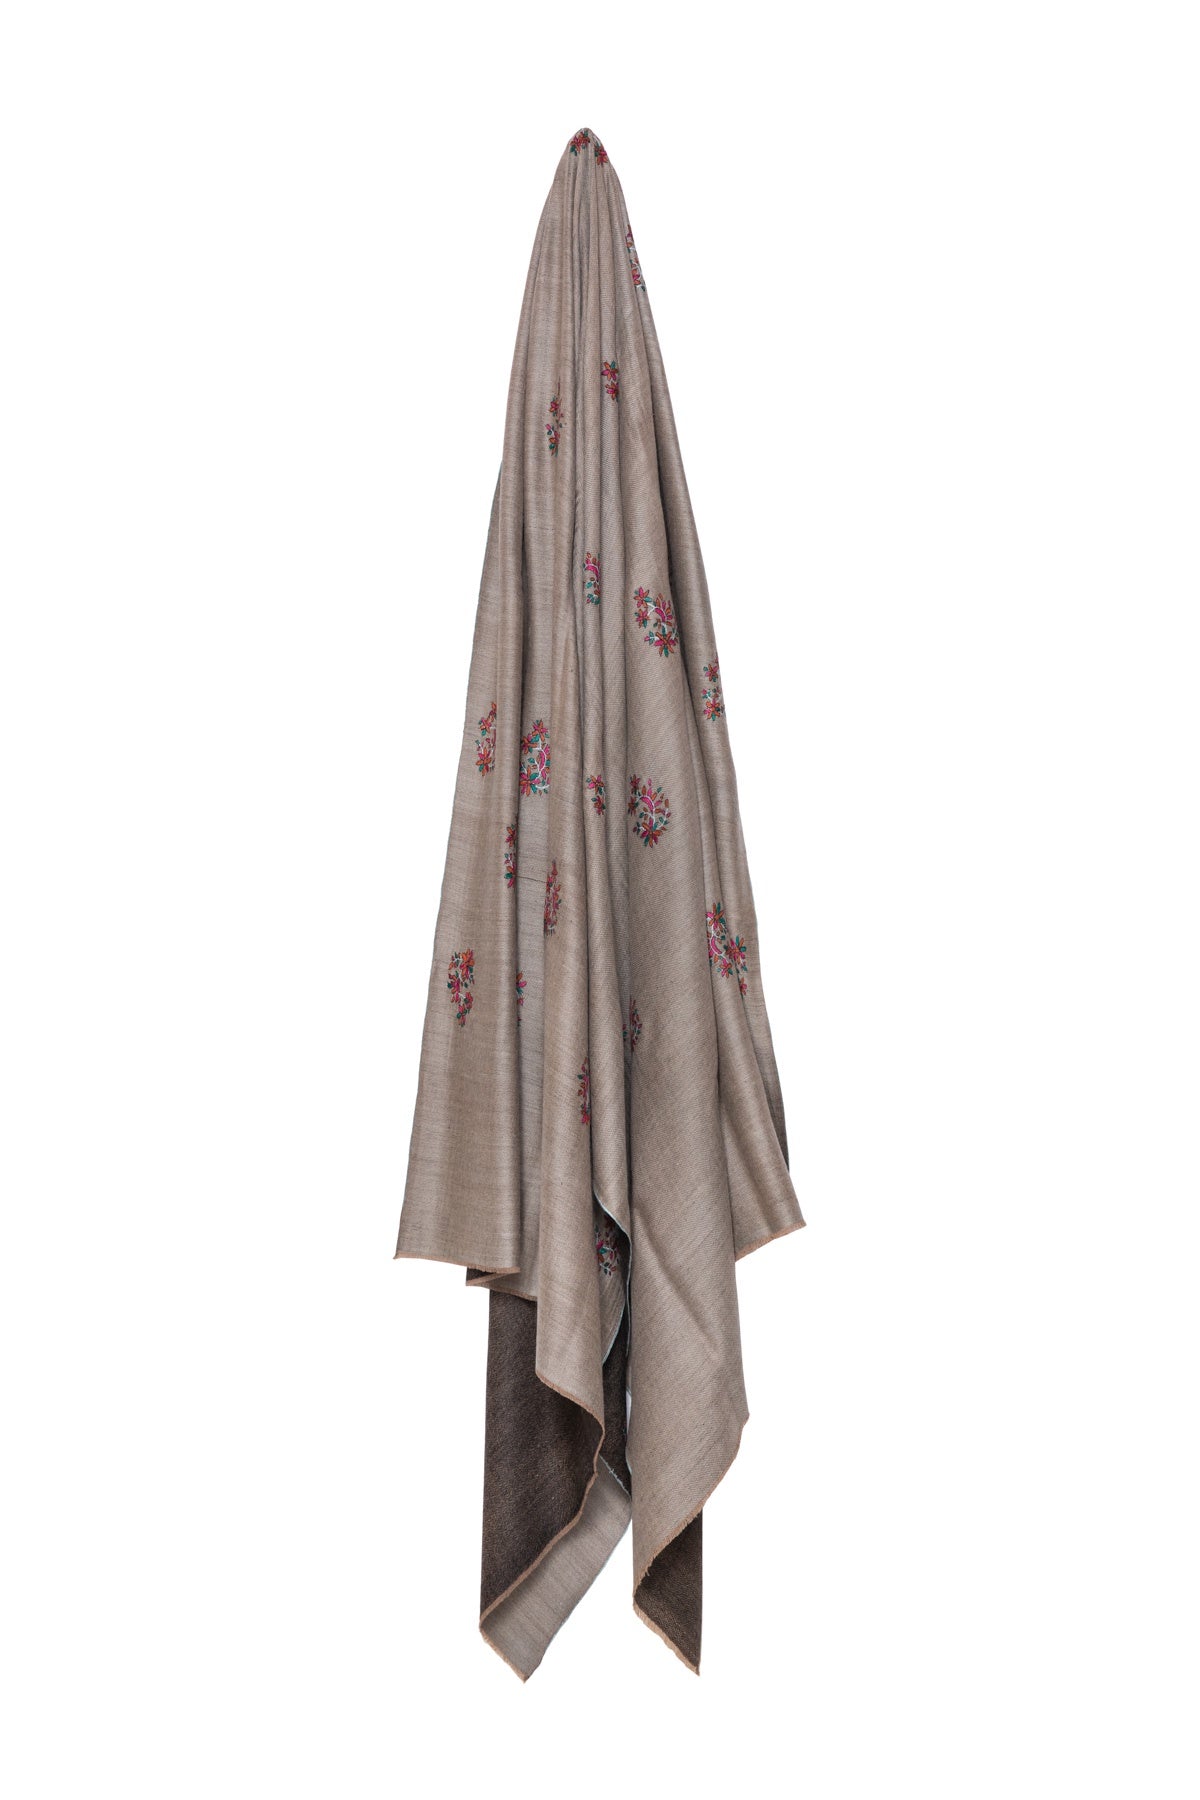 Special Reversible Floral Embroidered Shawl - Grey, Pink & Pale Blue